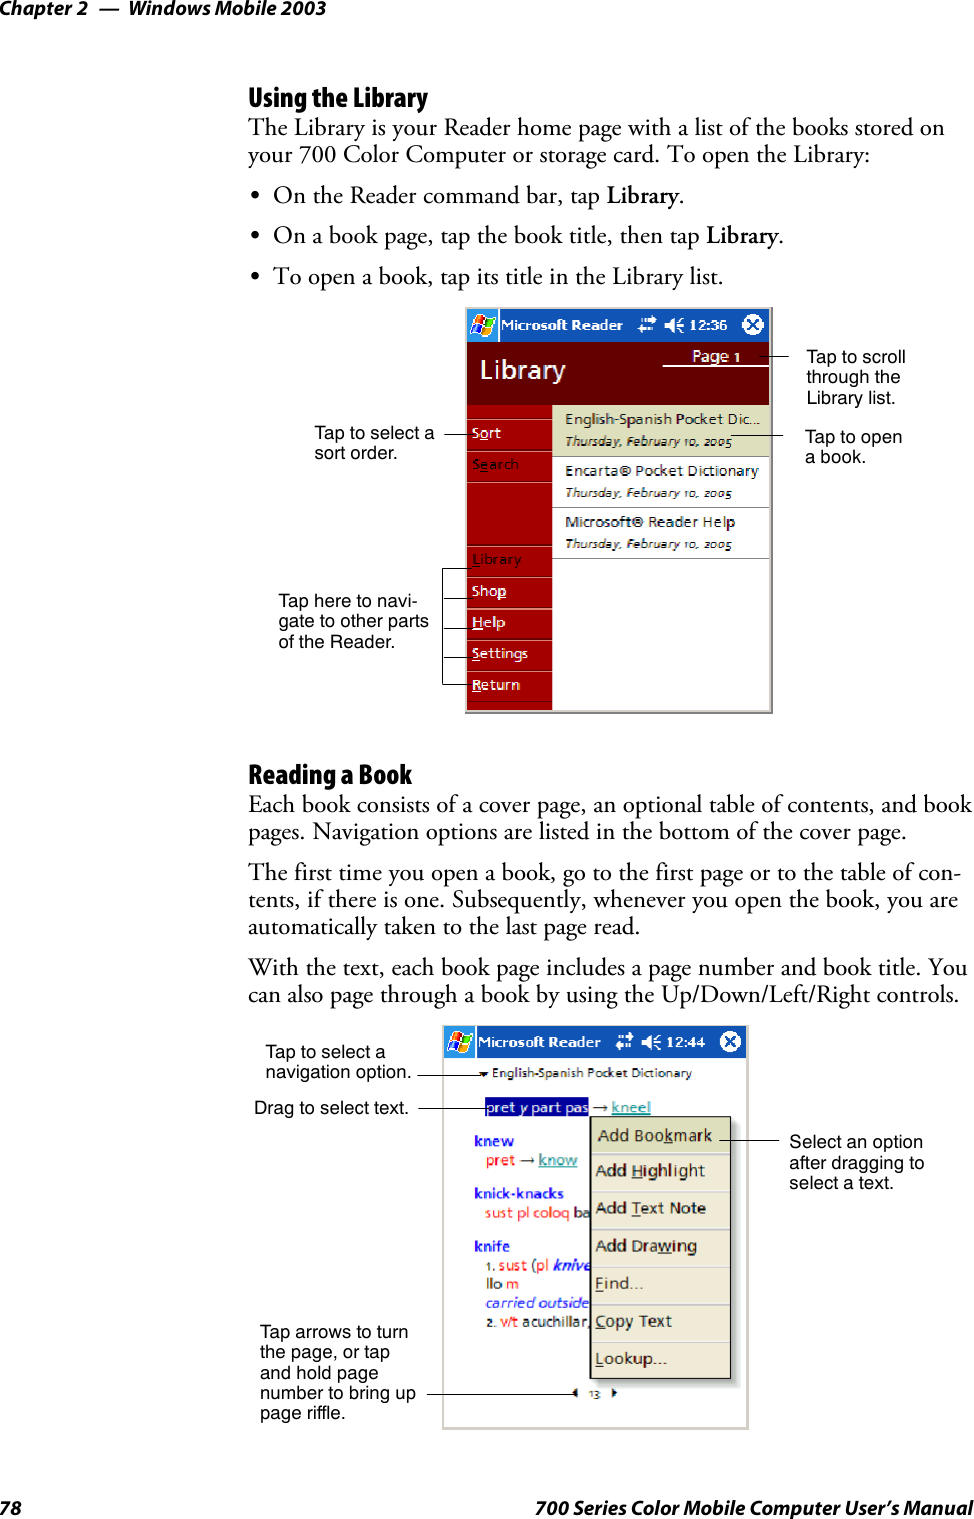 Windows Mobile 2003Chapter —278 700 Series Color Mobile Computer User’s ManualUsing the LibraryThe Library is your Reader home page with a list of the books stored onyour 700 Color Computer or storage card. To open the Library:SOn the Reader command bar, tap Library.SOn a book page, tap the book title, then tap Library.STo open a book, tap its title in the Library list.Taptoscrollthrough theLibrary list.Tap to opena book.Tap here to navi-gate to other partsof the Reader.Taptoselectasort order.Reading a BookEach book consists of a cover page, an optional table of contents, and bookpages. Navigation options are listed in the bottom of the cover page.The first time you open a book, go to the first page or to the table of con-tents, if there is one. Subsequently, whenever you open the book, you areautomatically taken to the last page read.With the text, each book page includes a page number and book title. Youcan also page through a book by using the Up/Down/Left/Right controls.Taptoselectanavigation option.Select an optionafter dragging toselect a text.Drag to select text.Tap arrows to turnthe page, or tapand hold pagenumber to bring uppage riffle.